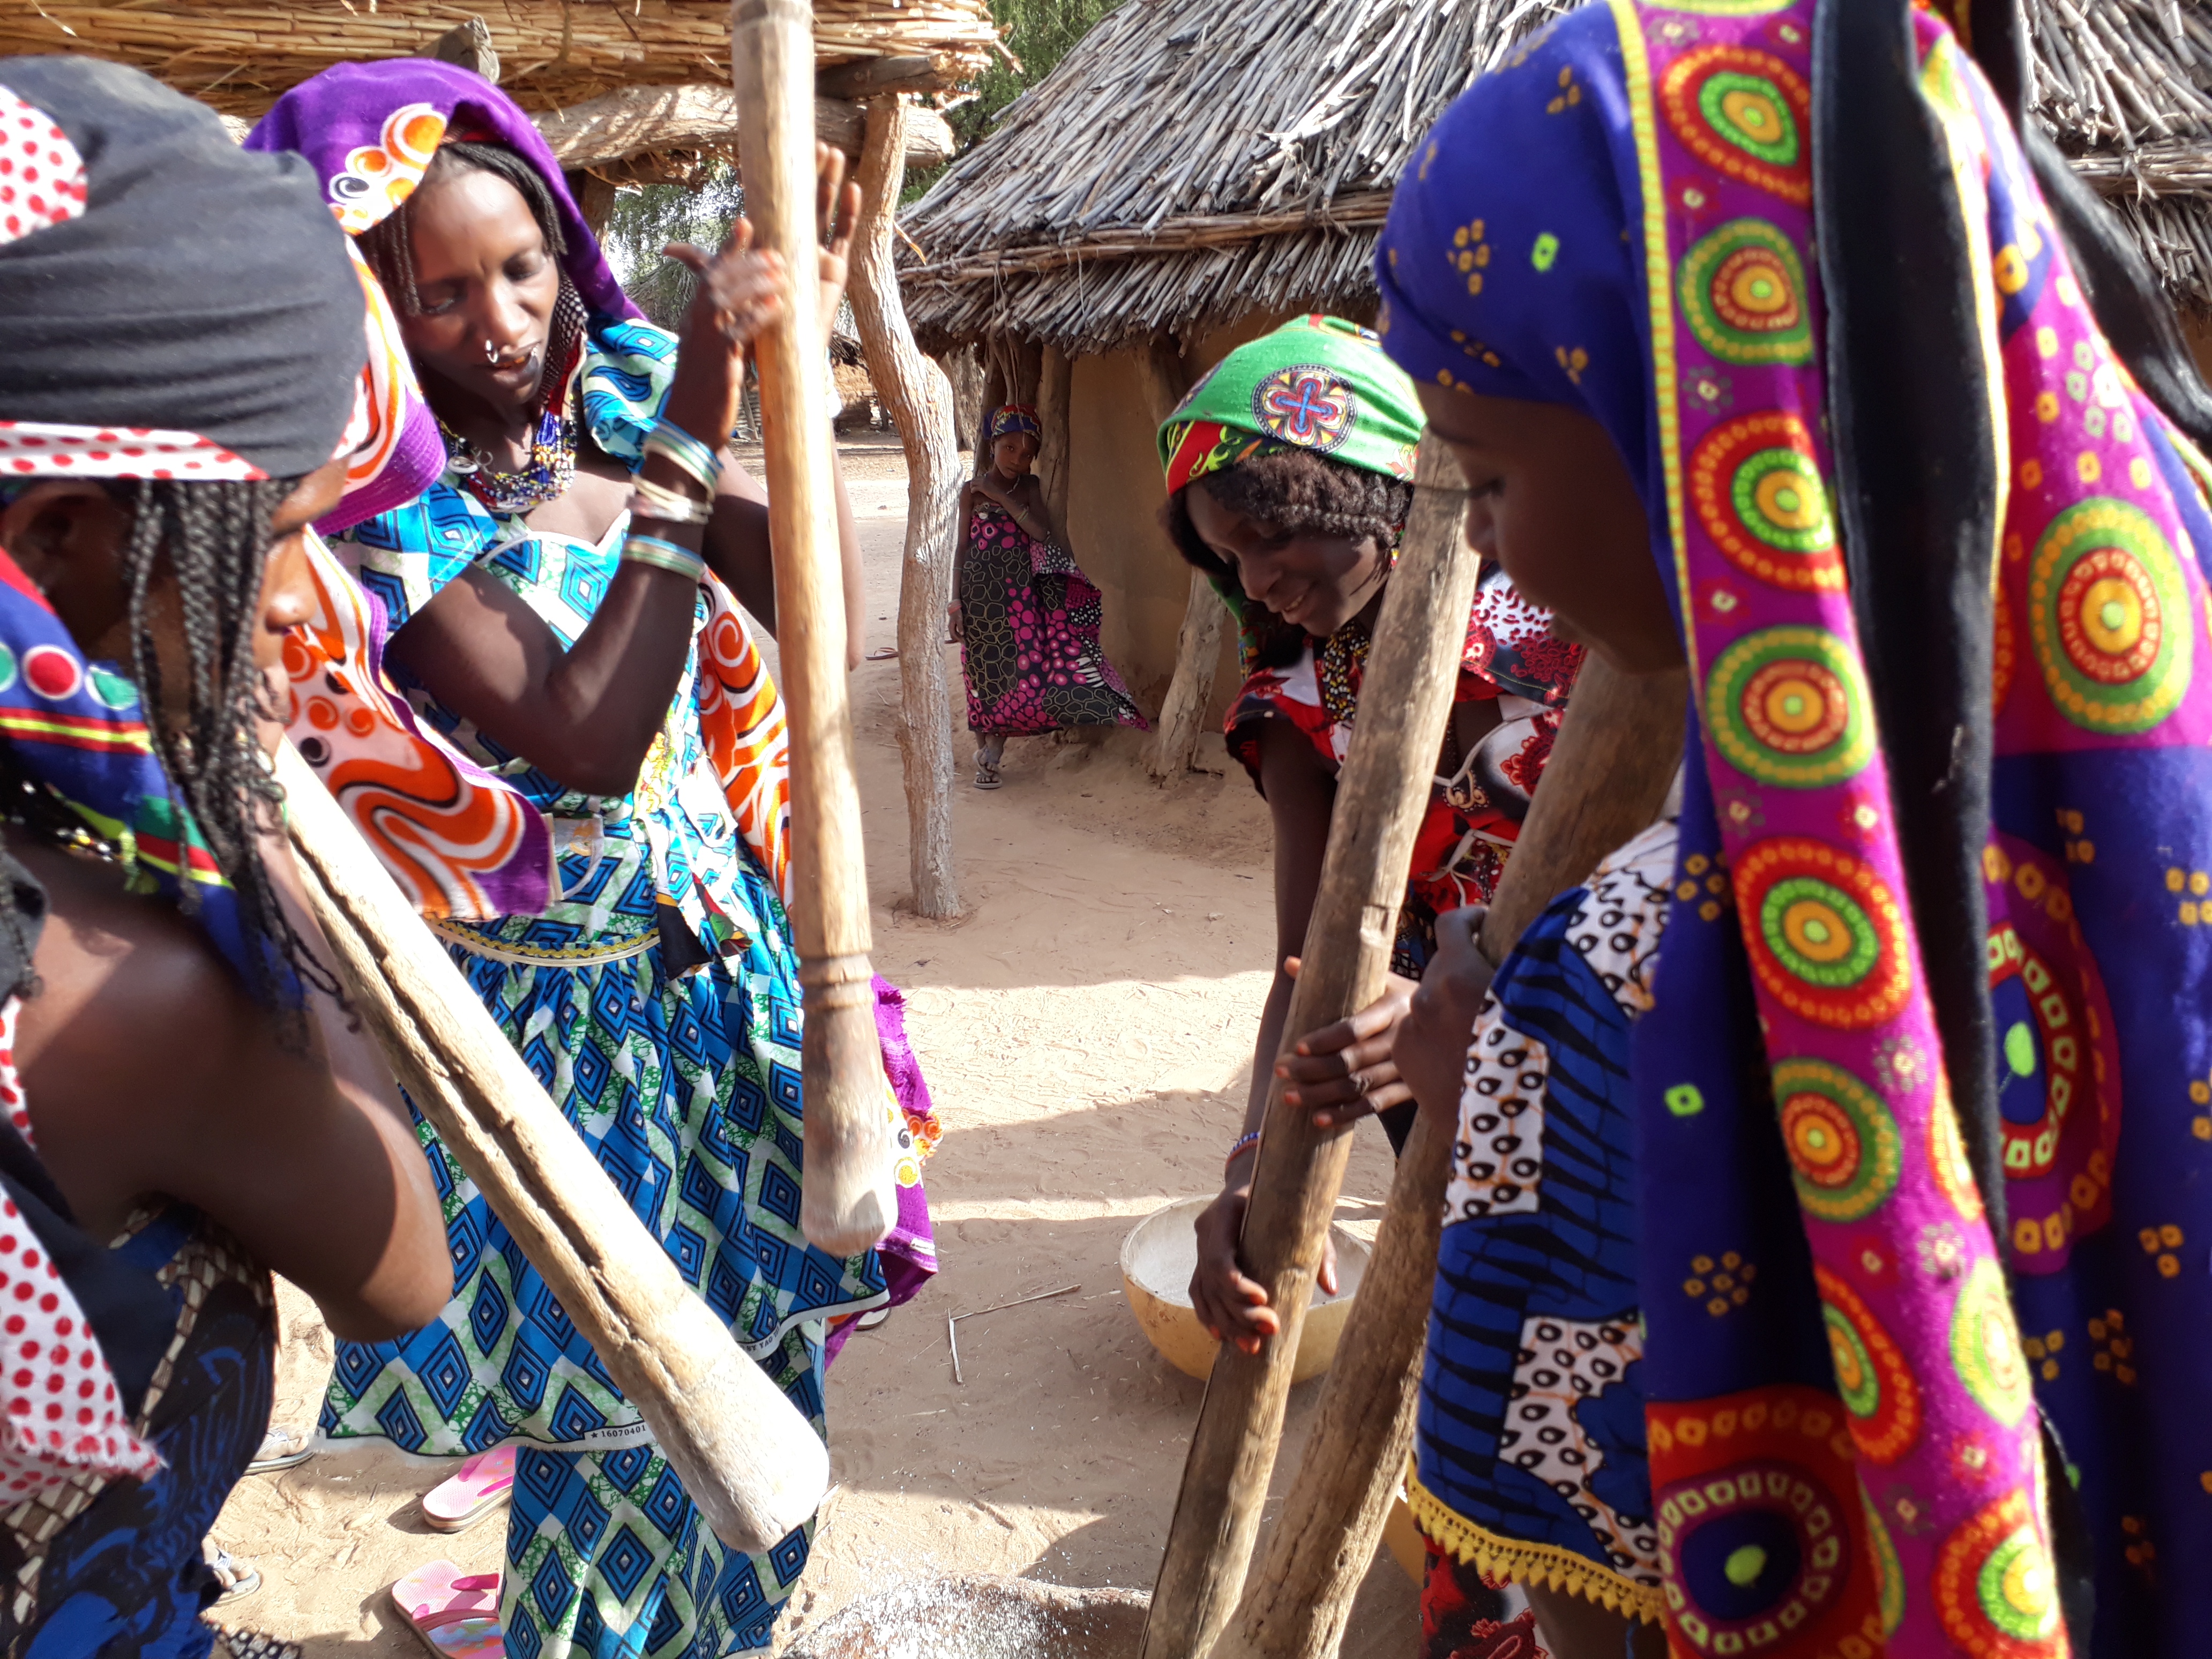 In Chad, the empowerment of Fulani women is accelerating